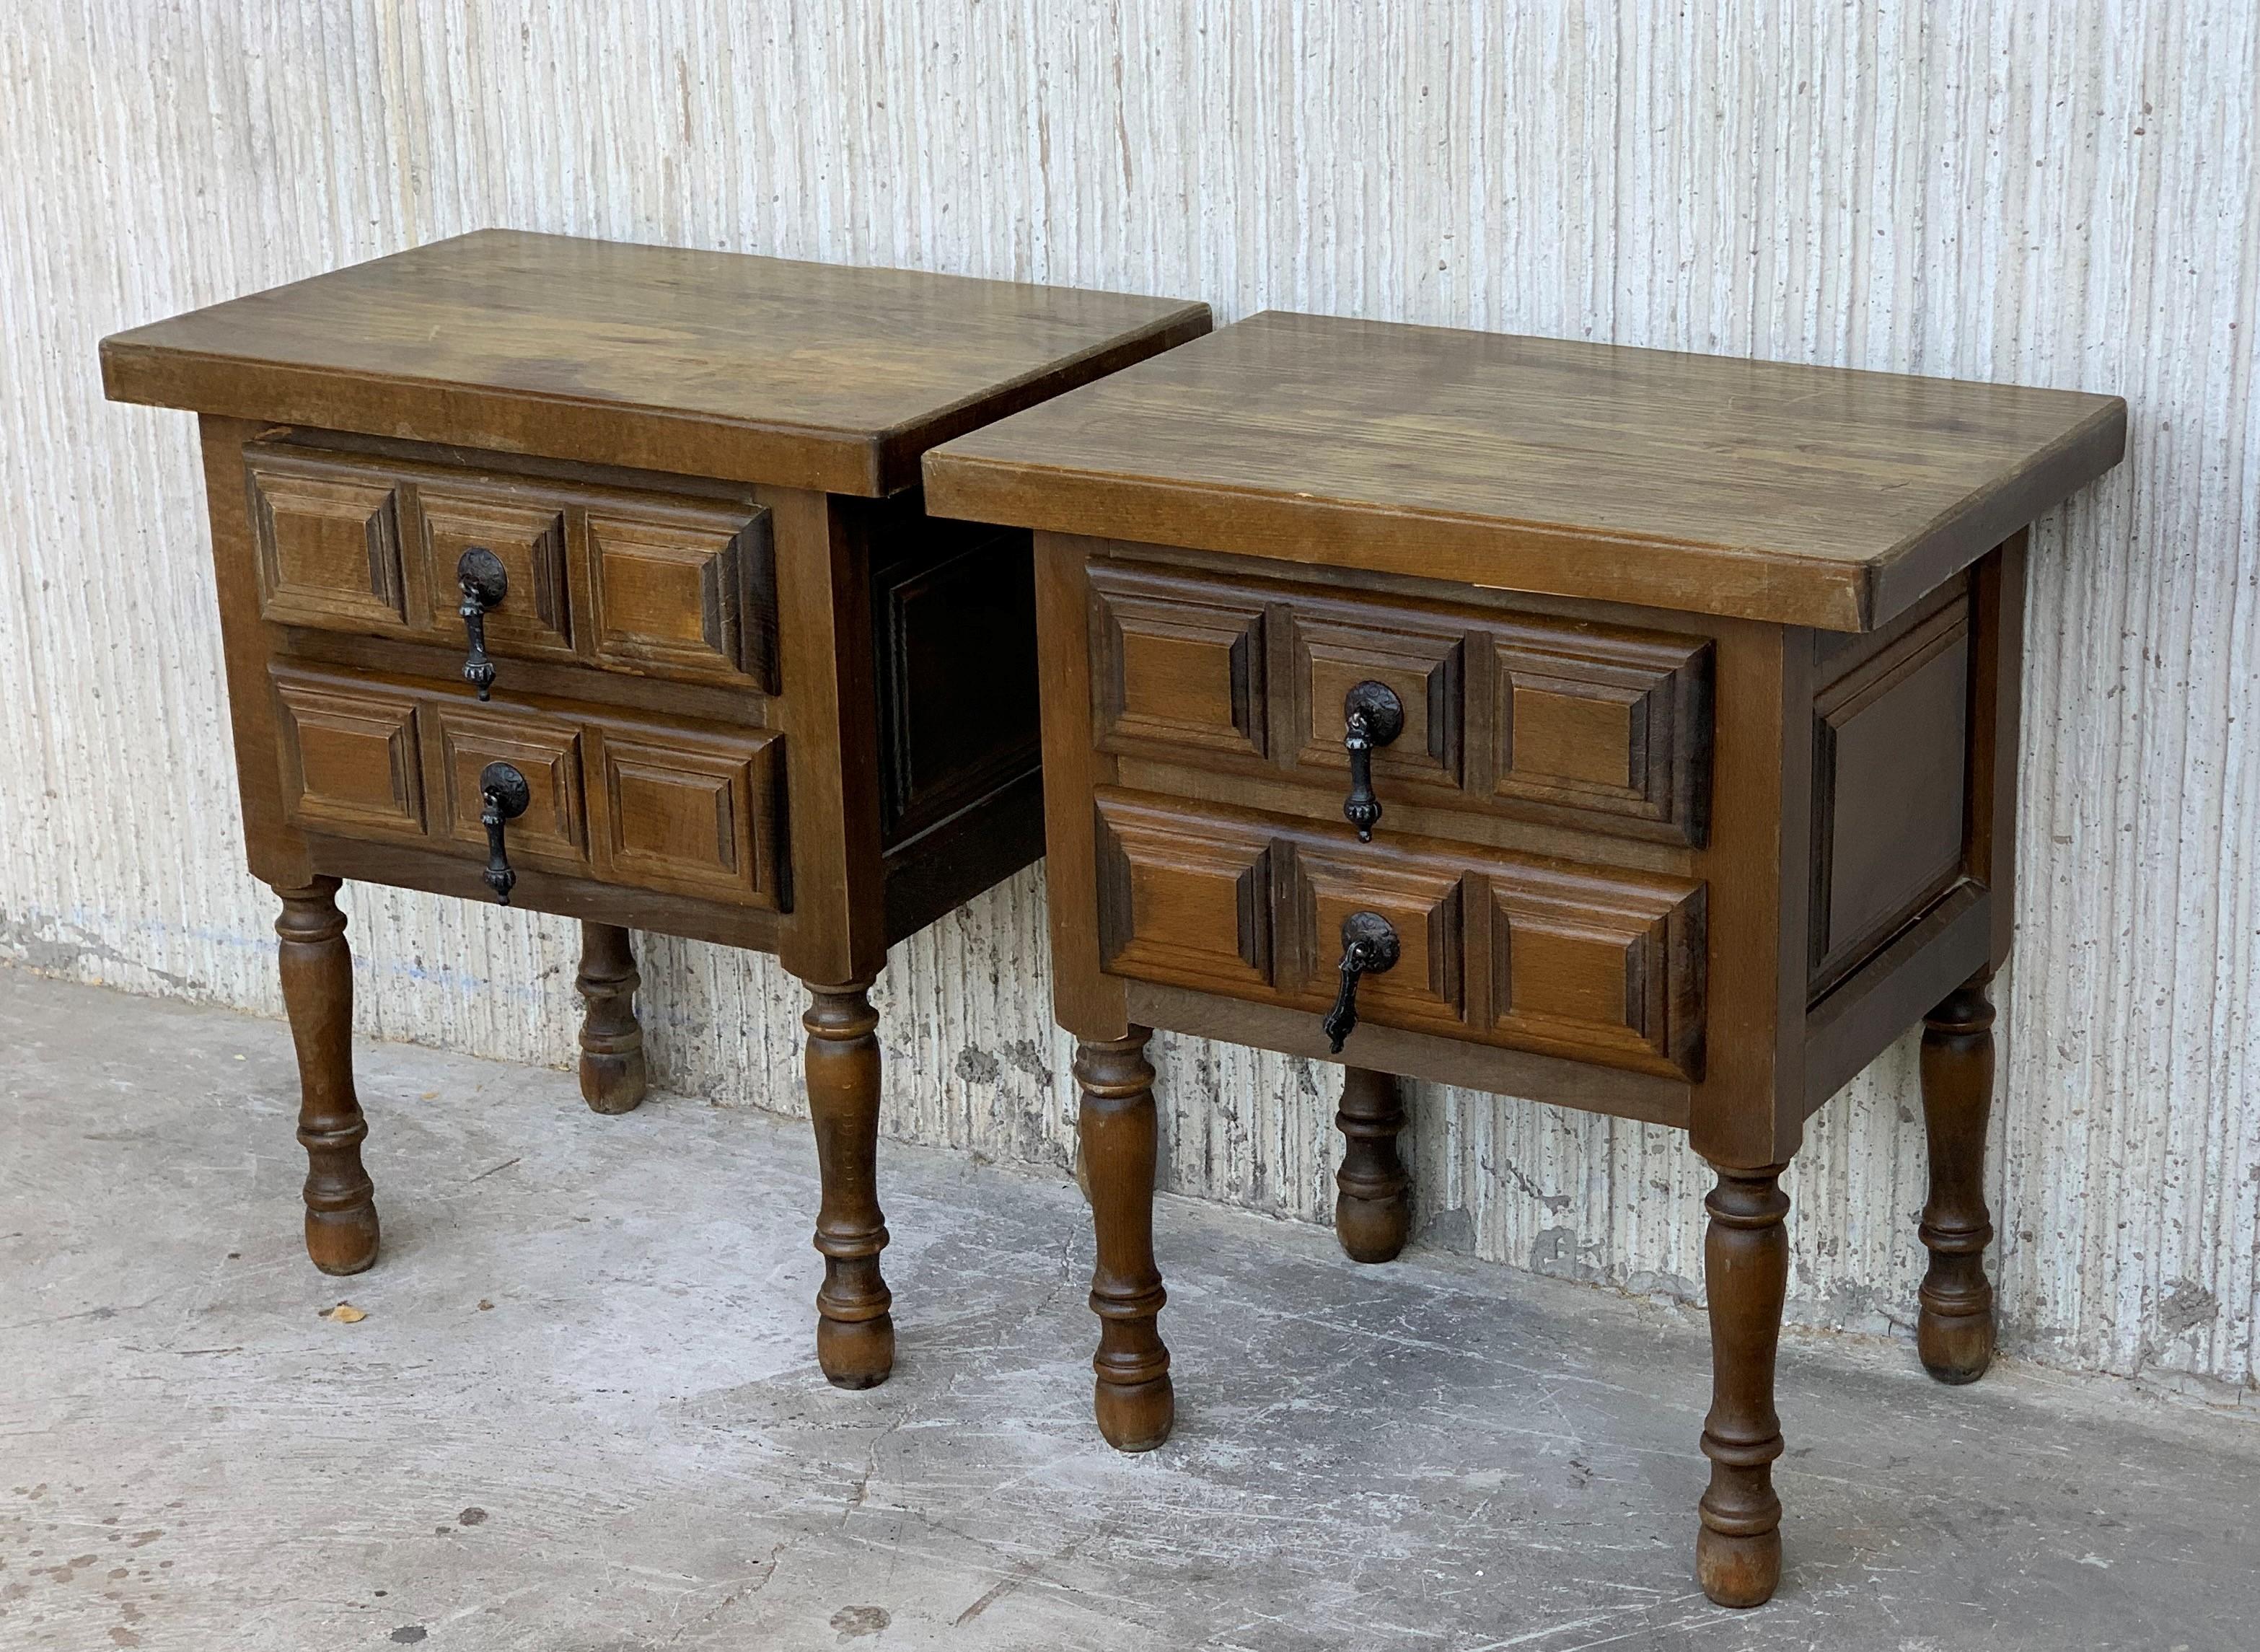 20th century pair of Spanish nightstands with two carved drawer and iron hardware.
Beautiful tables that you can use like a nightstands or side tables, end tables... or table lamp.